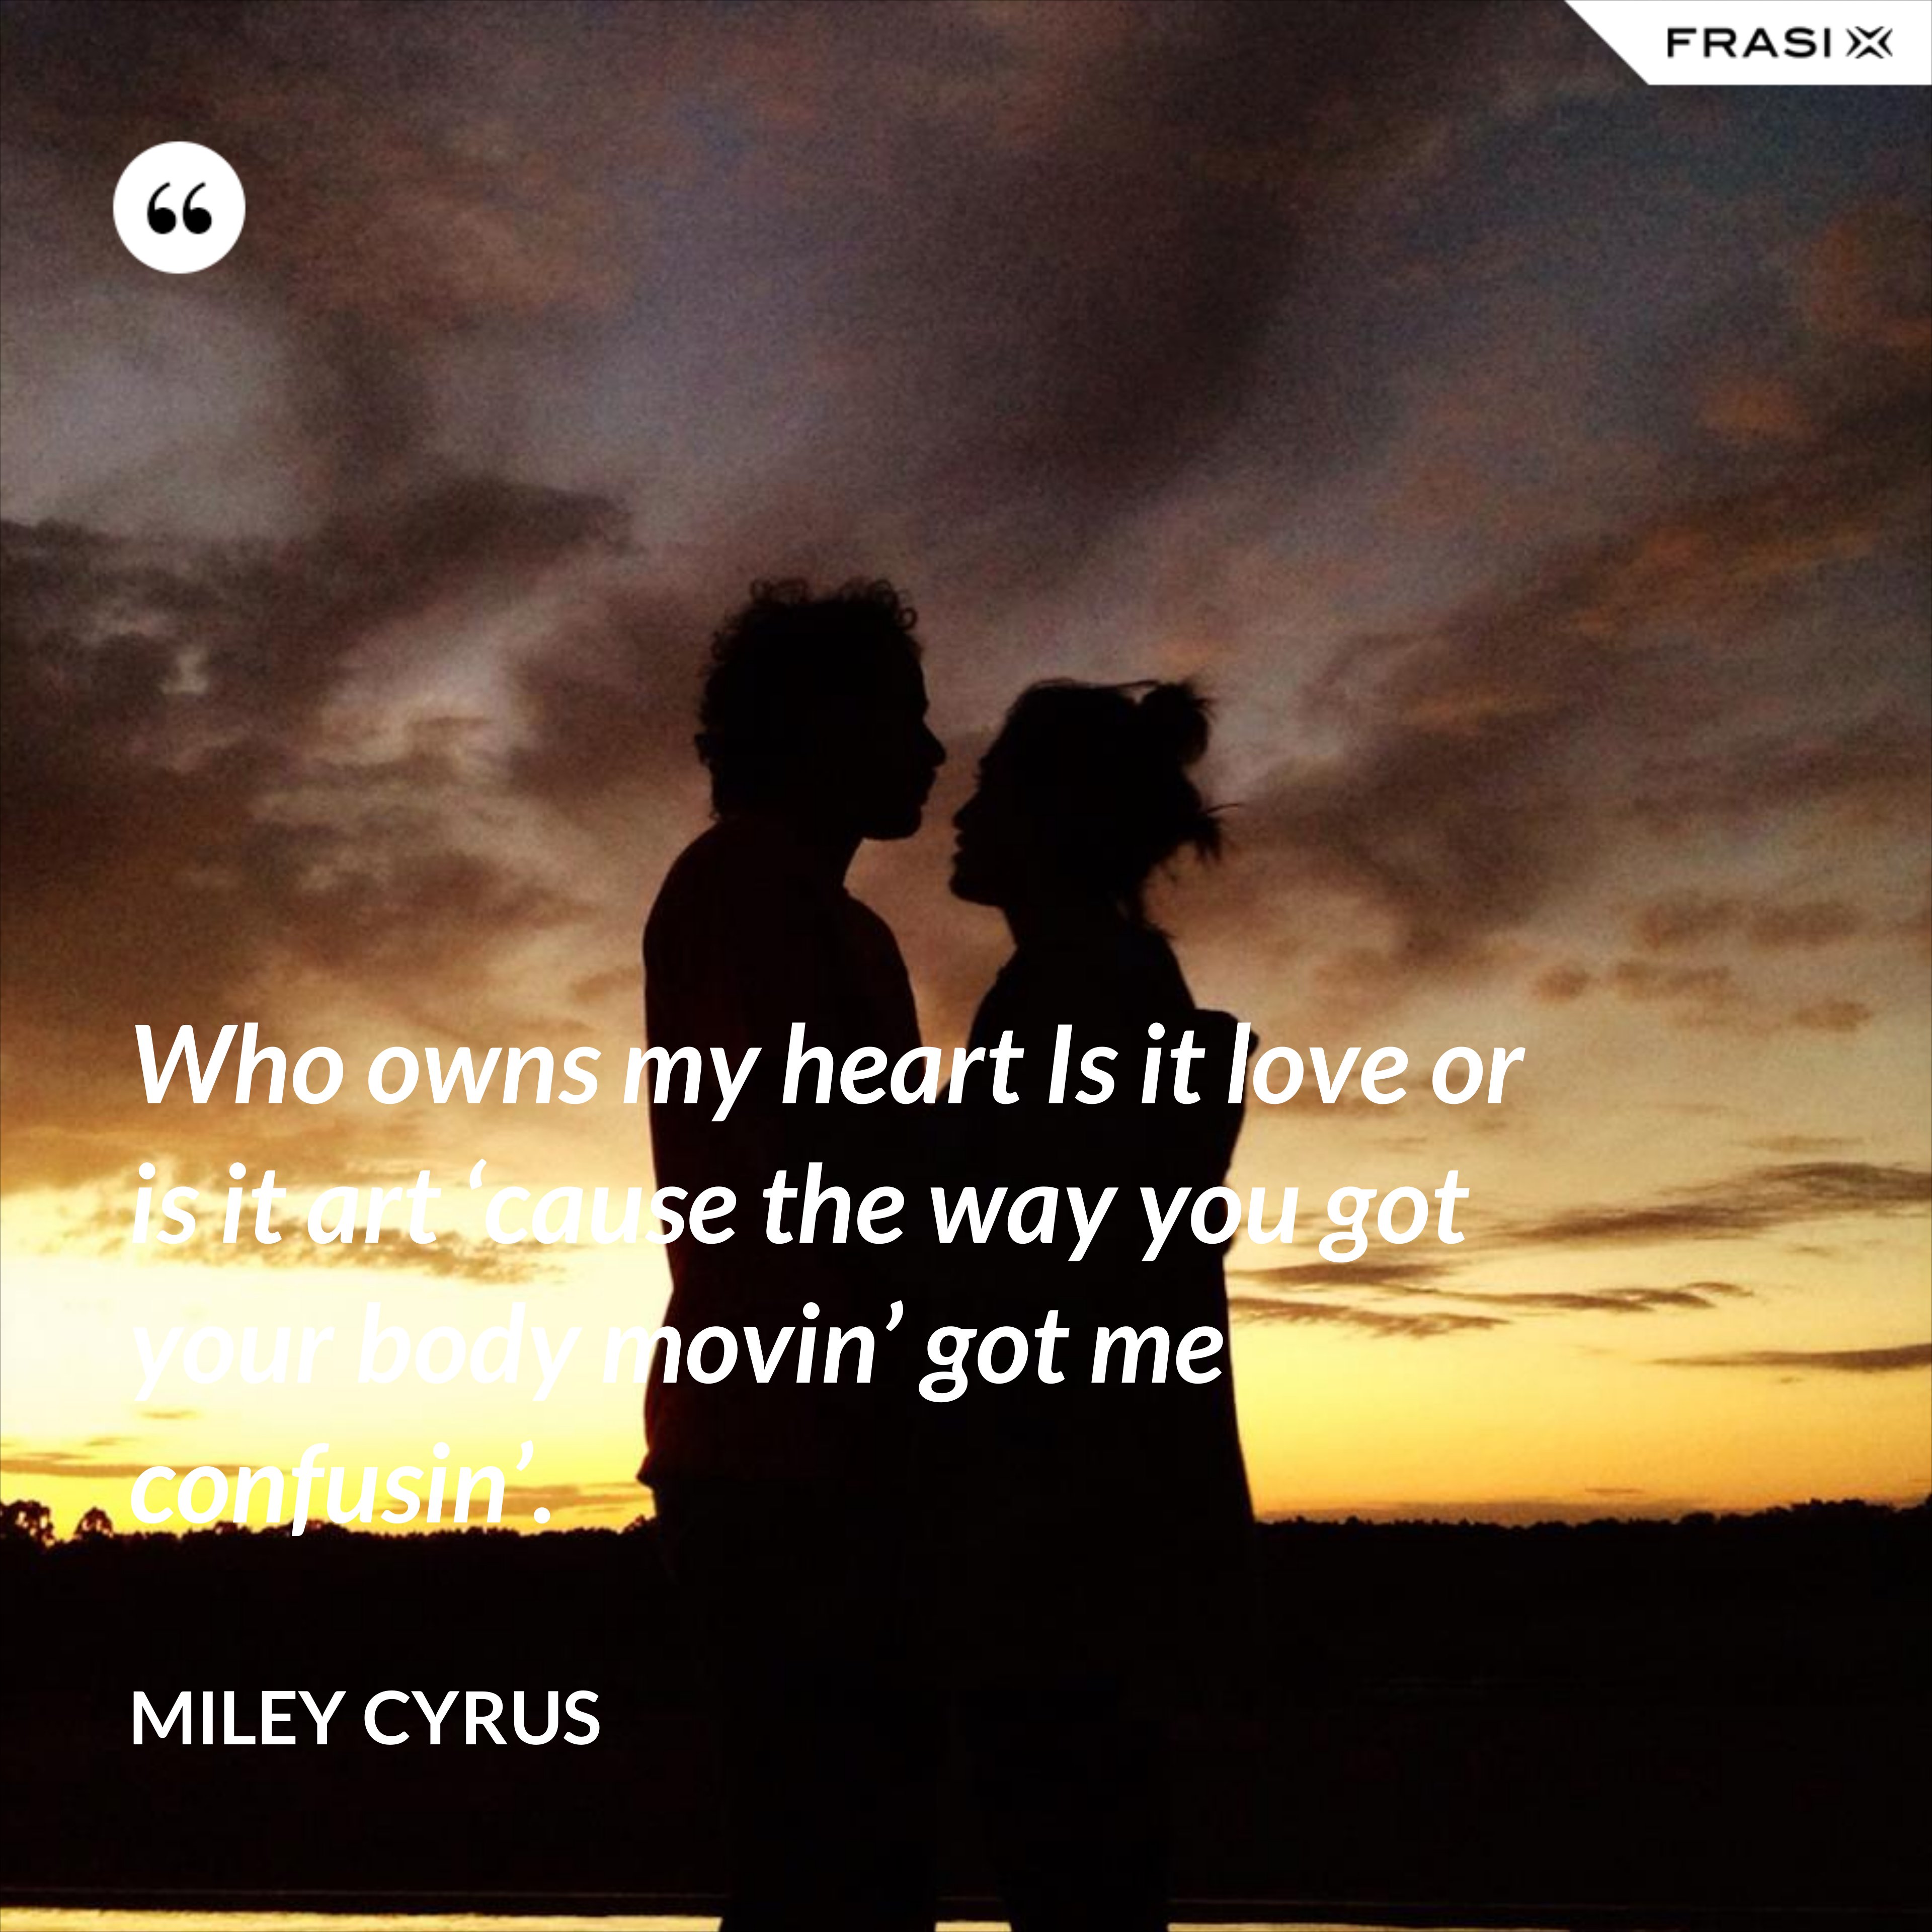 Who owns my heart Is it love or is it art ‘cause the way you got your body movin’ got me confusin’. - Miley Cyrus